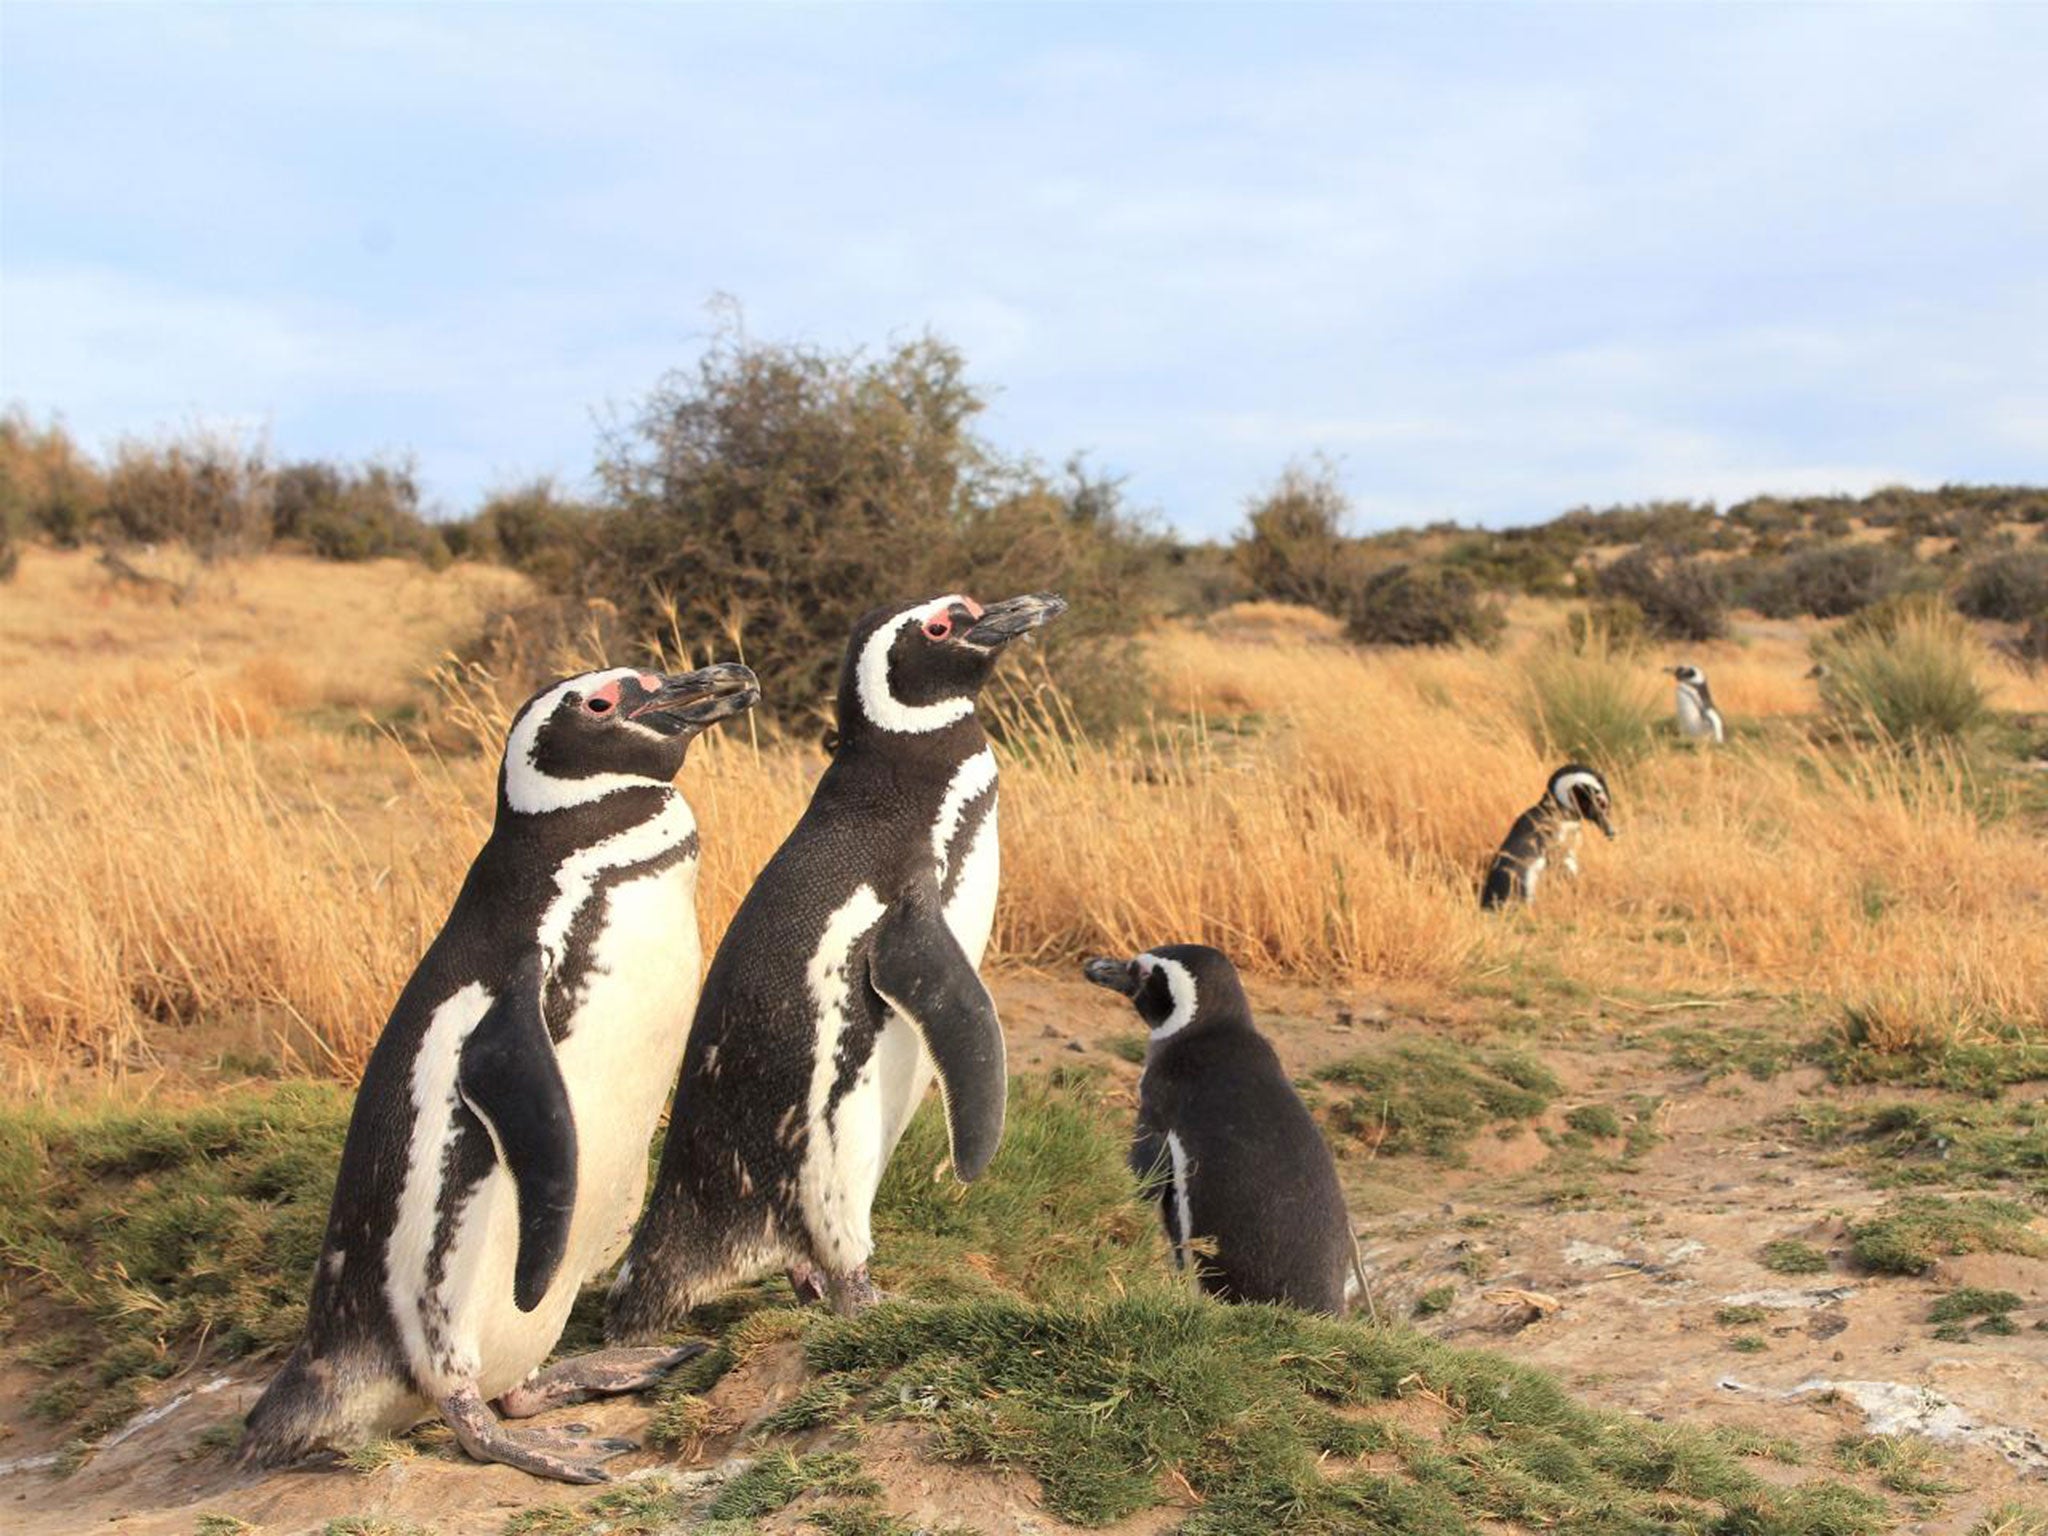 Magellanic penguins, which are becoming threatened and stranded too far north by human activity